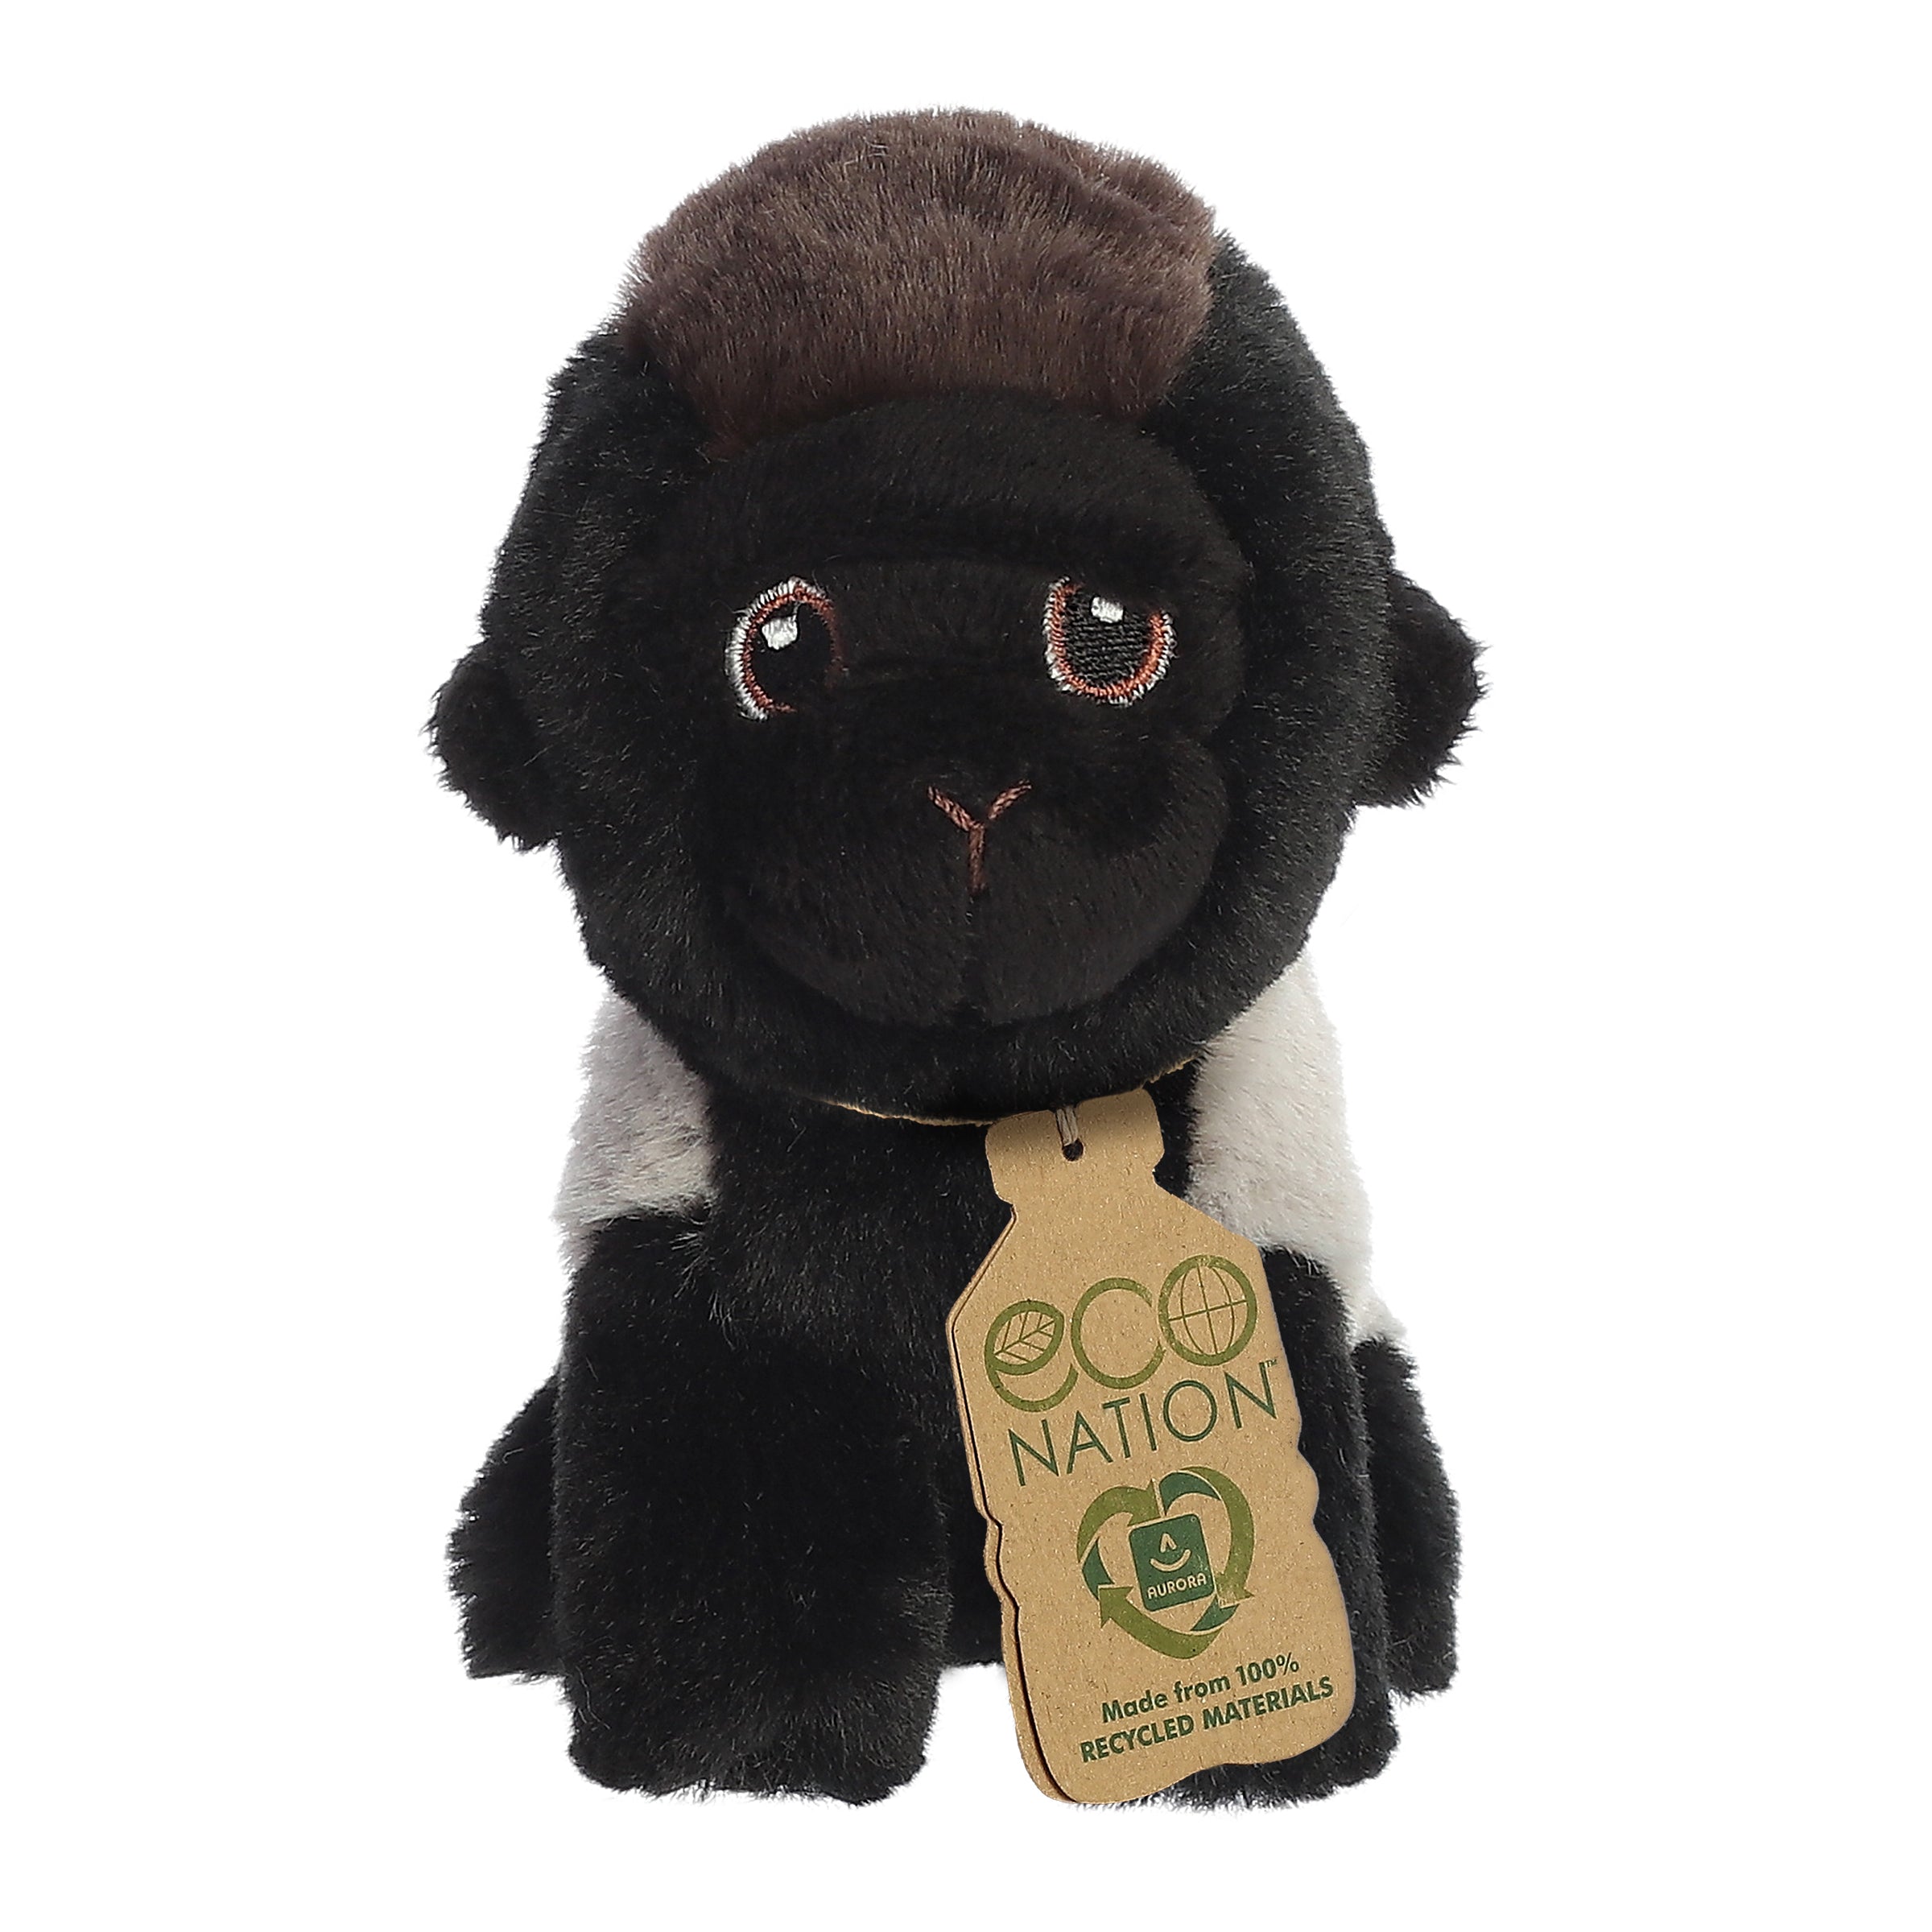 A sweet gorilla plush with a rich black and grey fur coat, embroidered eyes, and an eco-nation tag around its neck